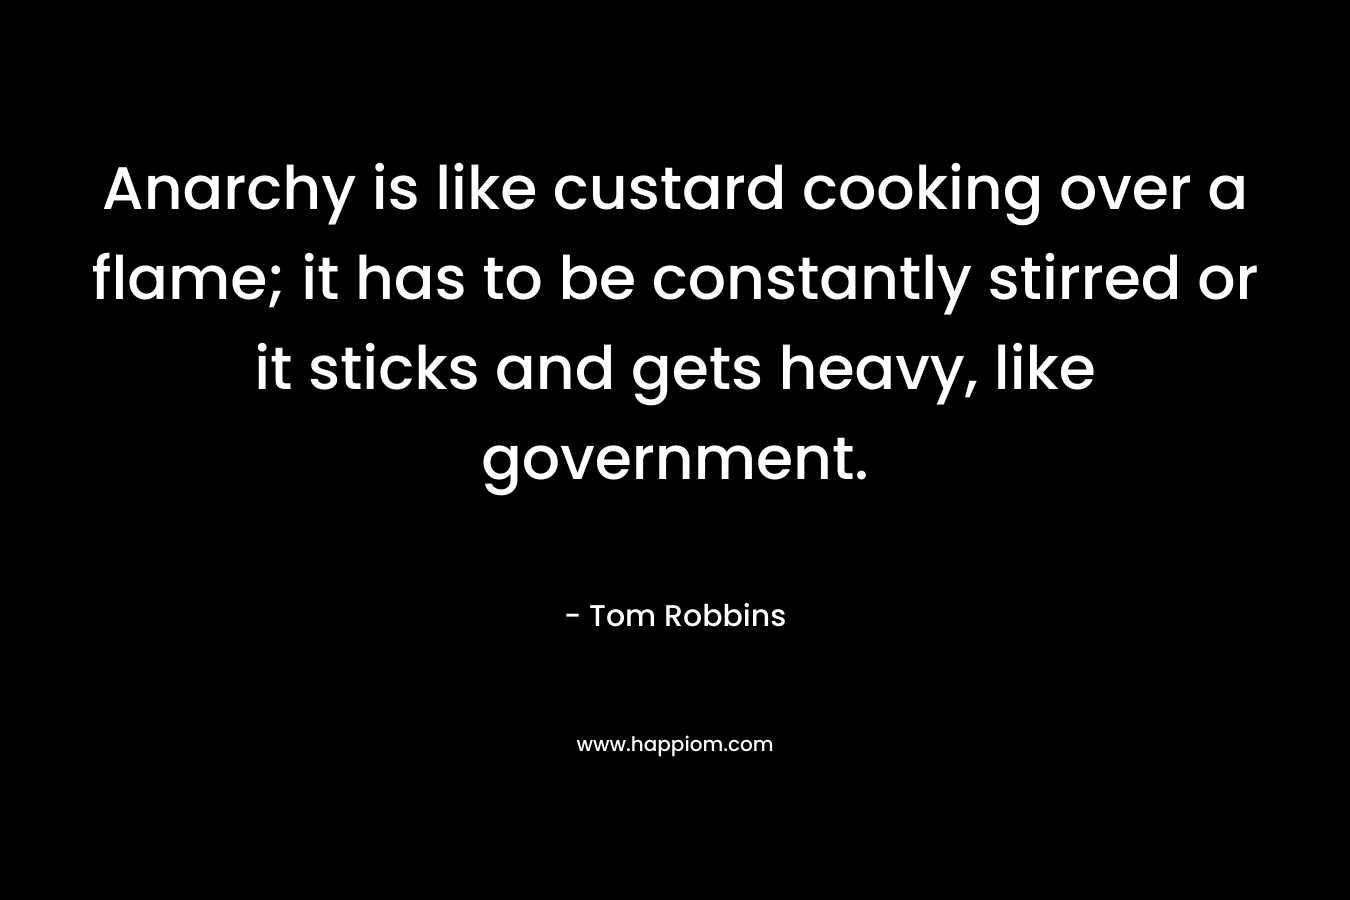 Anarchy is like custard cooking over a flame; it has to be constantly stirred or it sticks and gets heavy, like government. – Tom Robbins